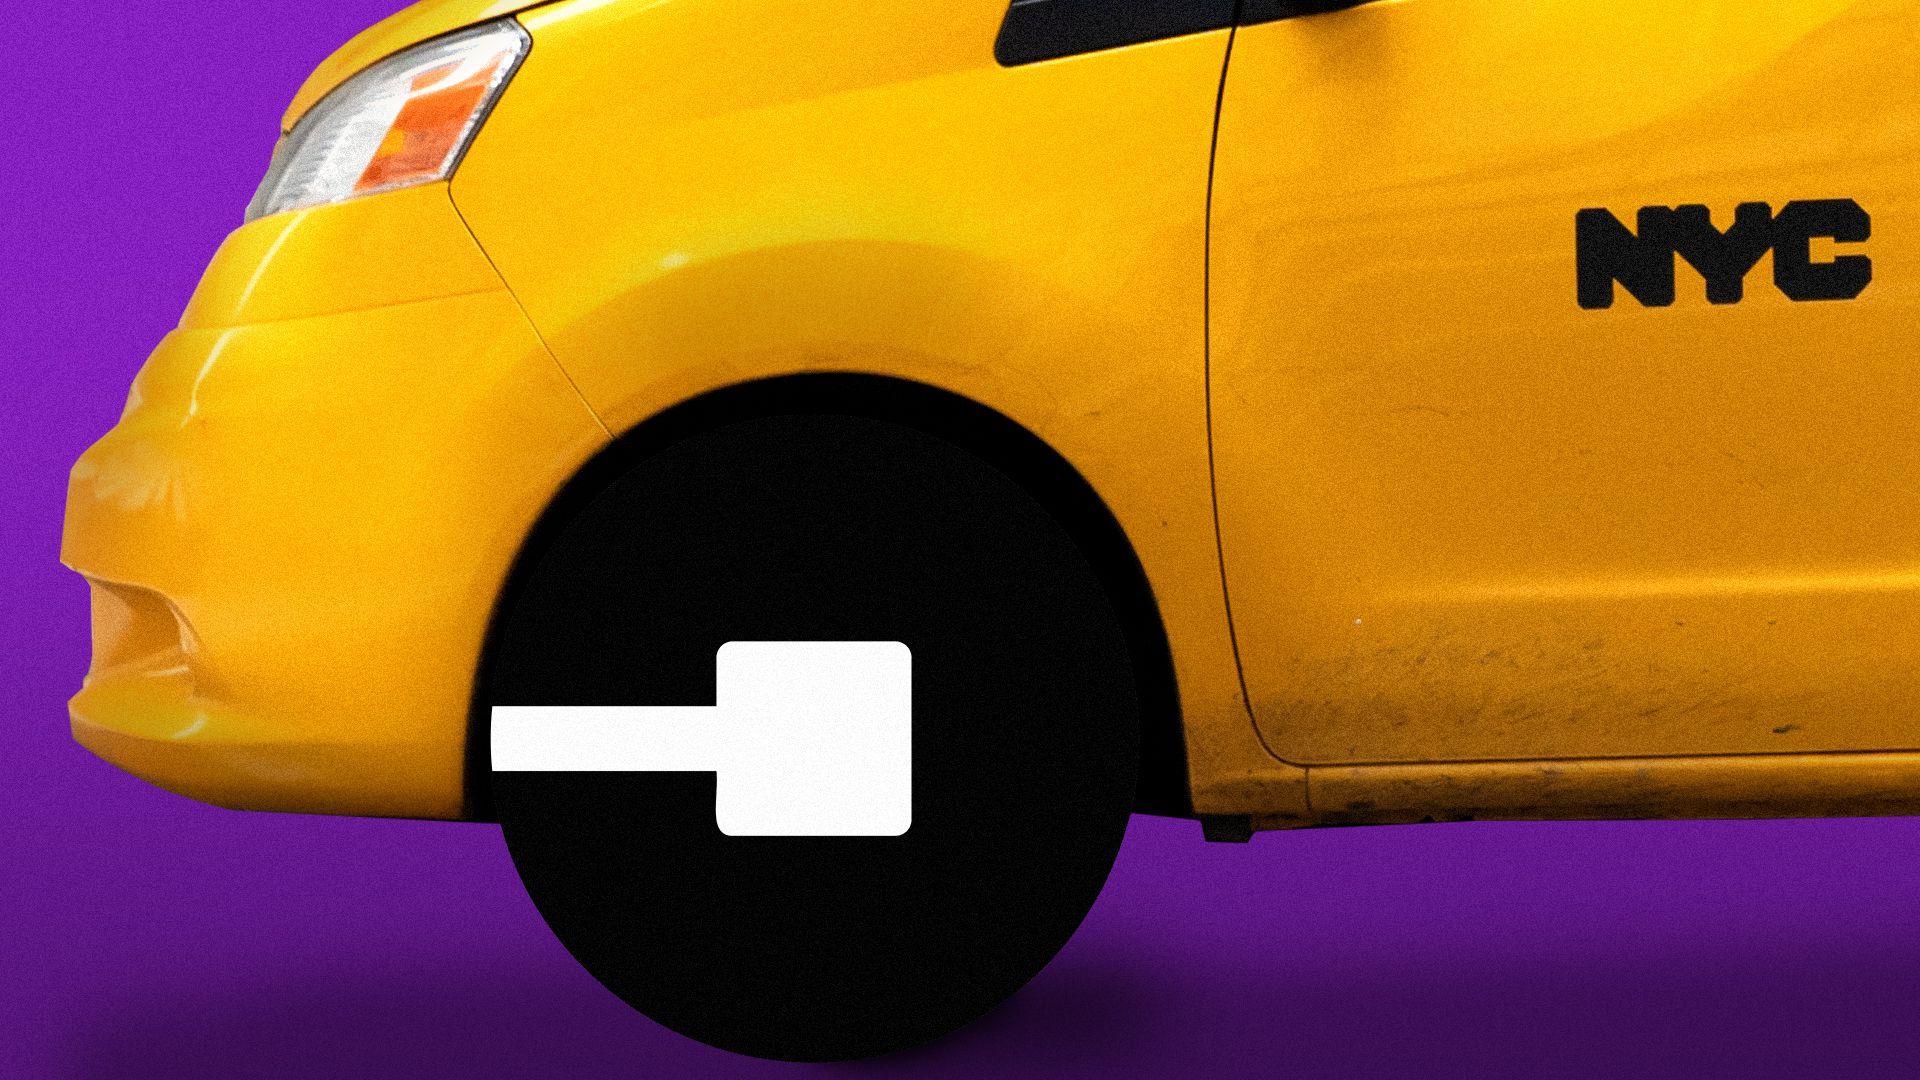 Photo illustration of an NYC taxi with Uber’s logo as the front wheel.